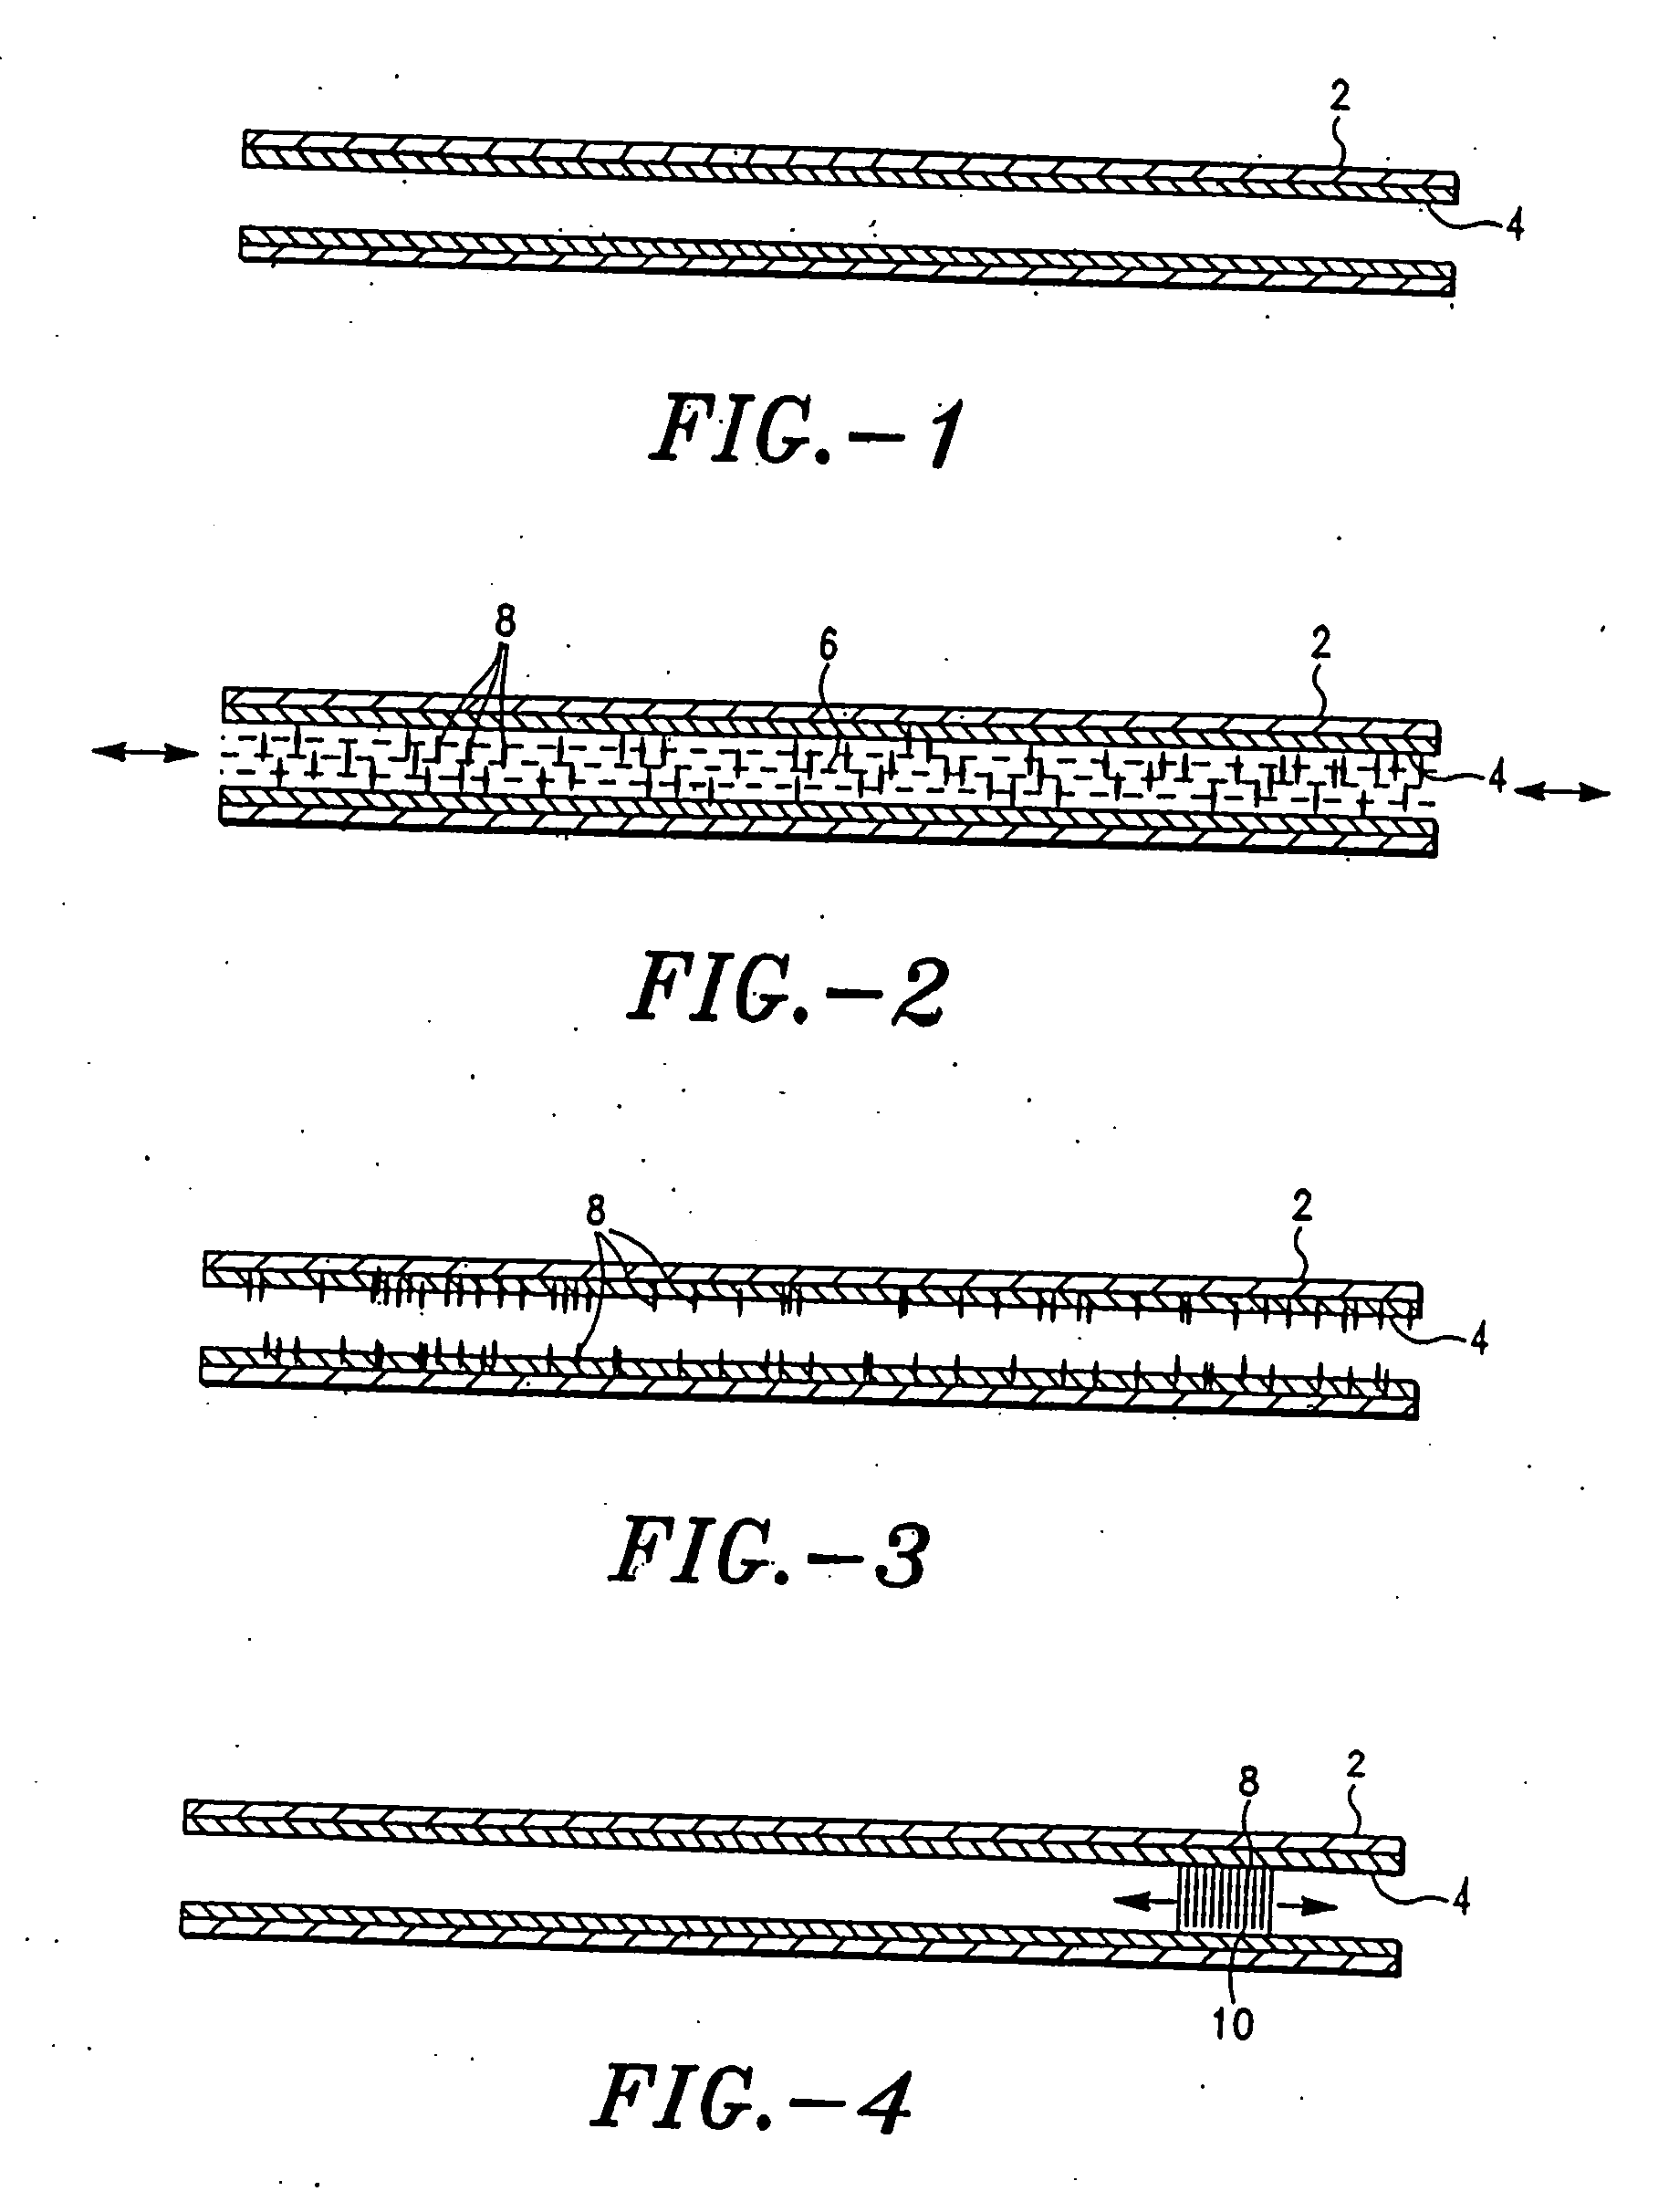 Open channel solid phase extraction systems and methods